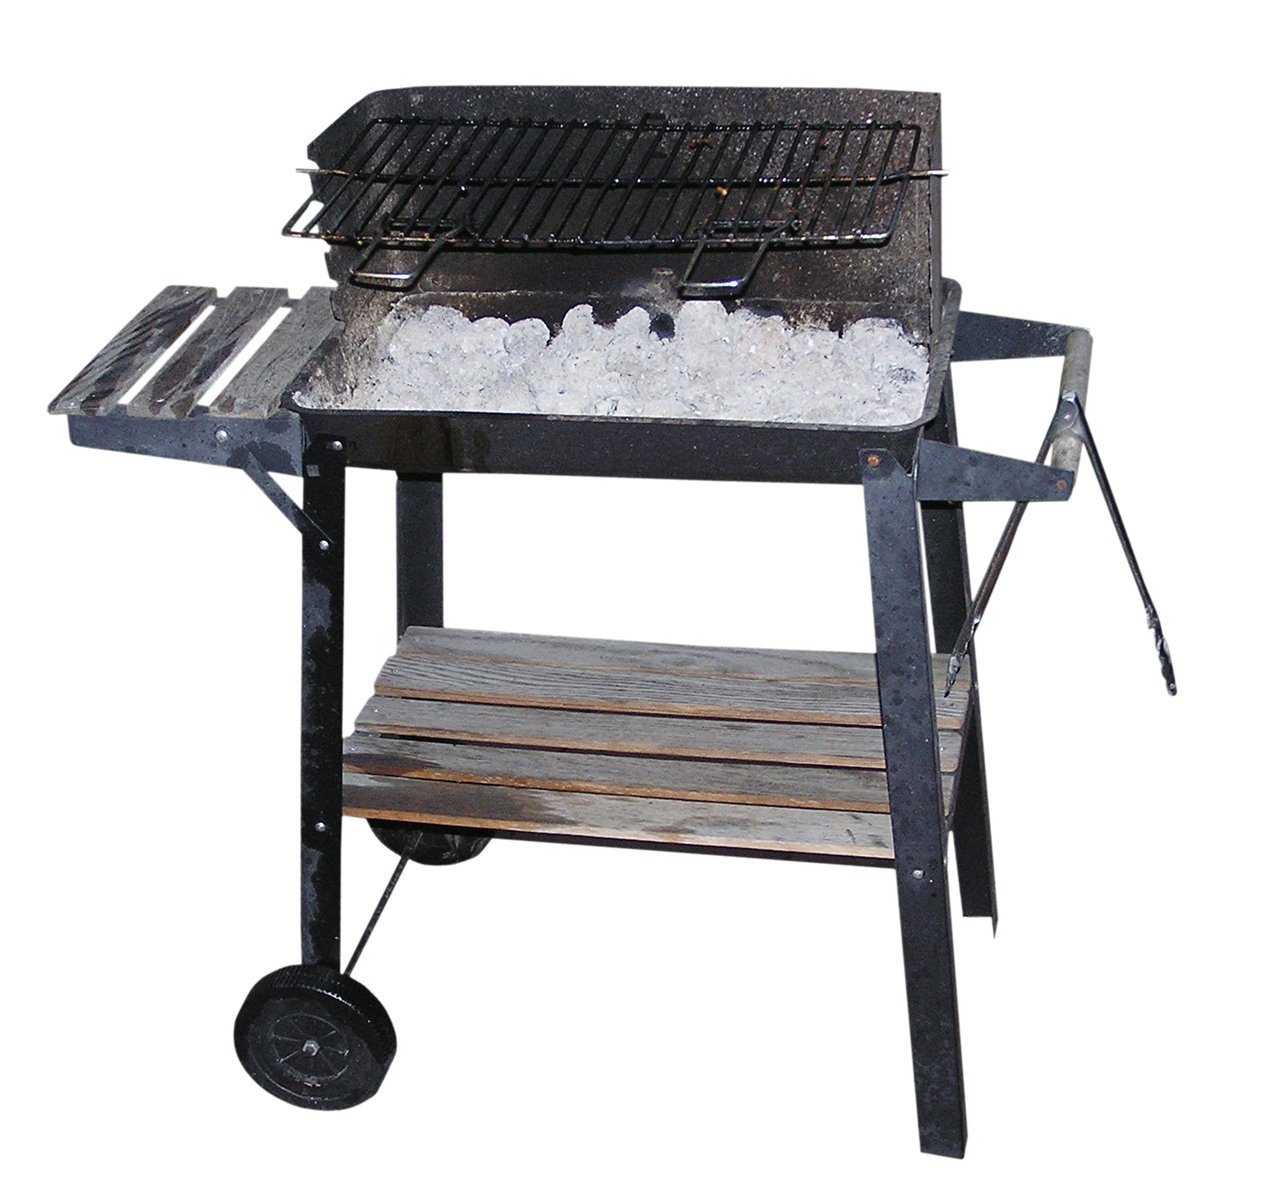 an image of a charcoal grill with a basket for cooking